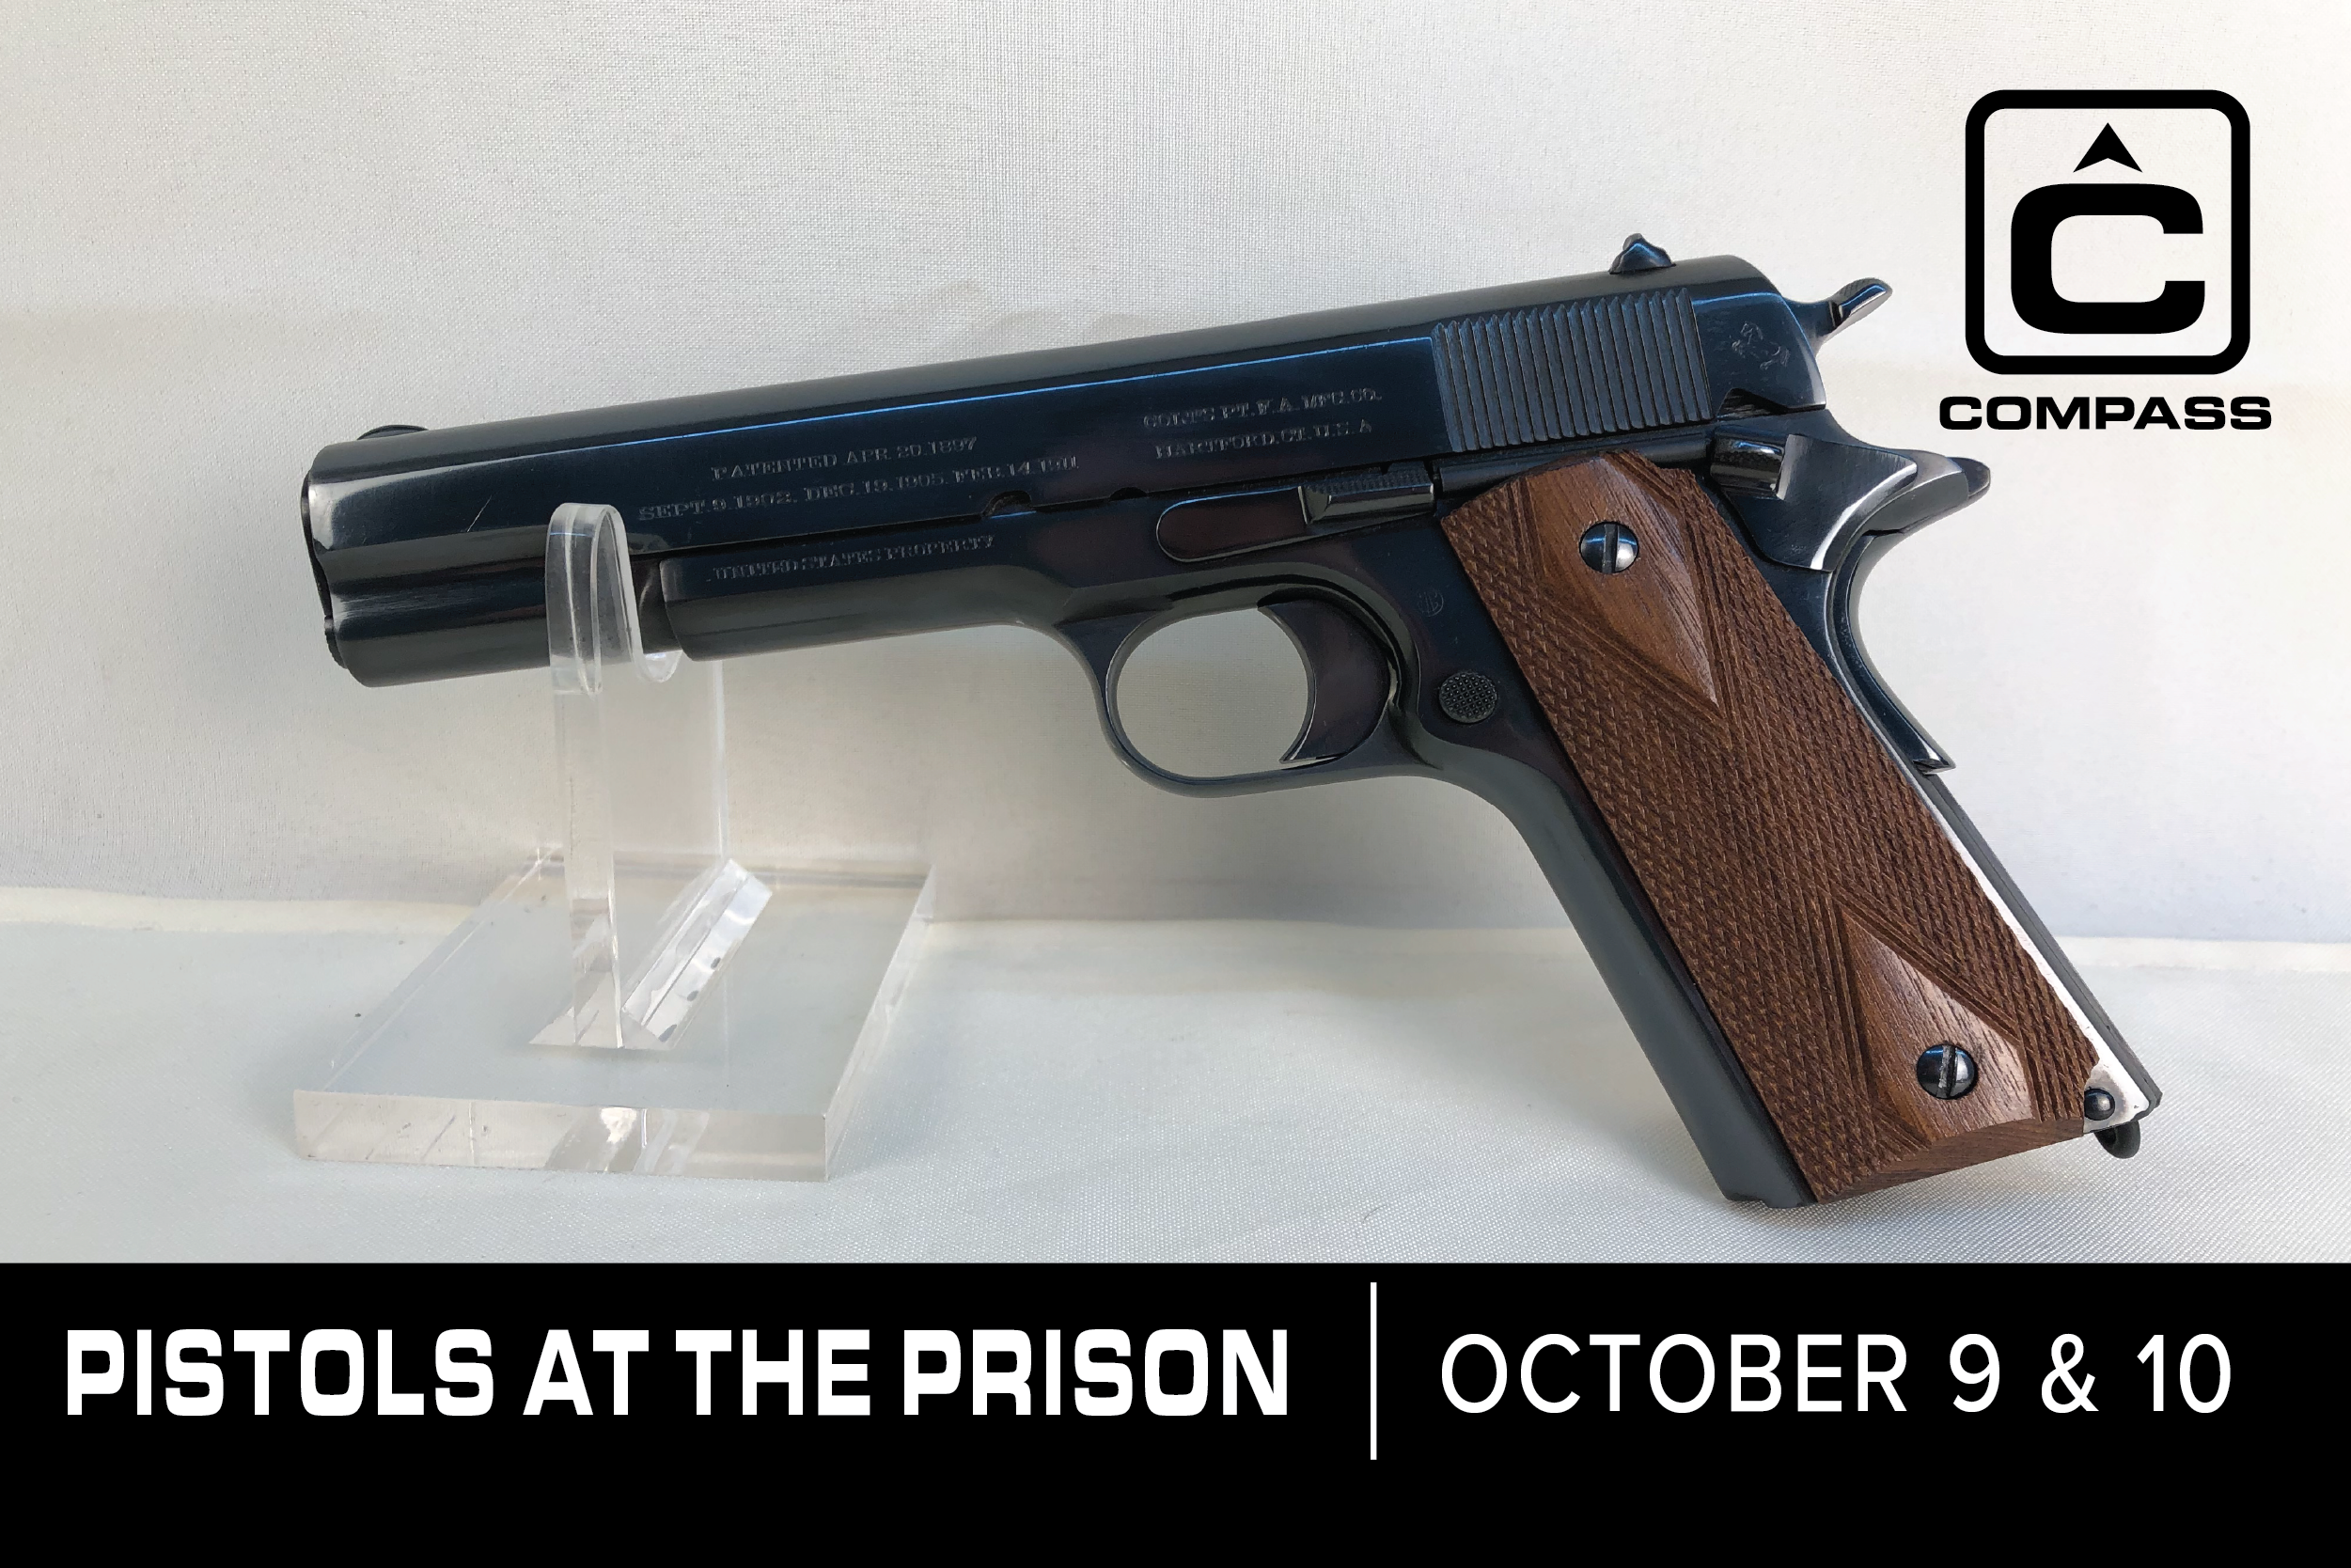 Possibly Rare Colt 1911 in Chattanooga